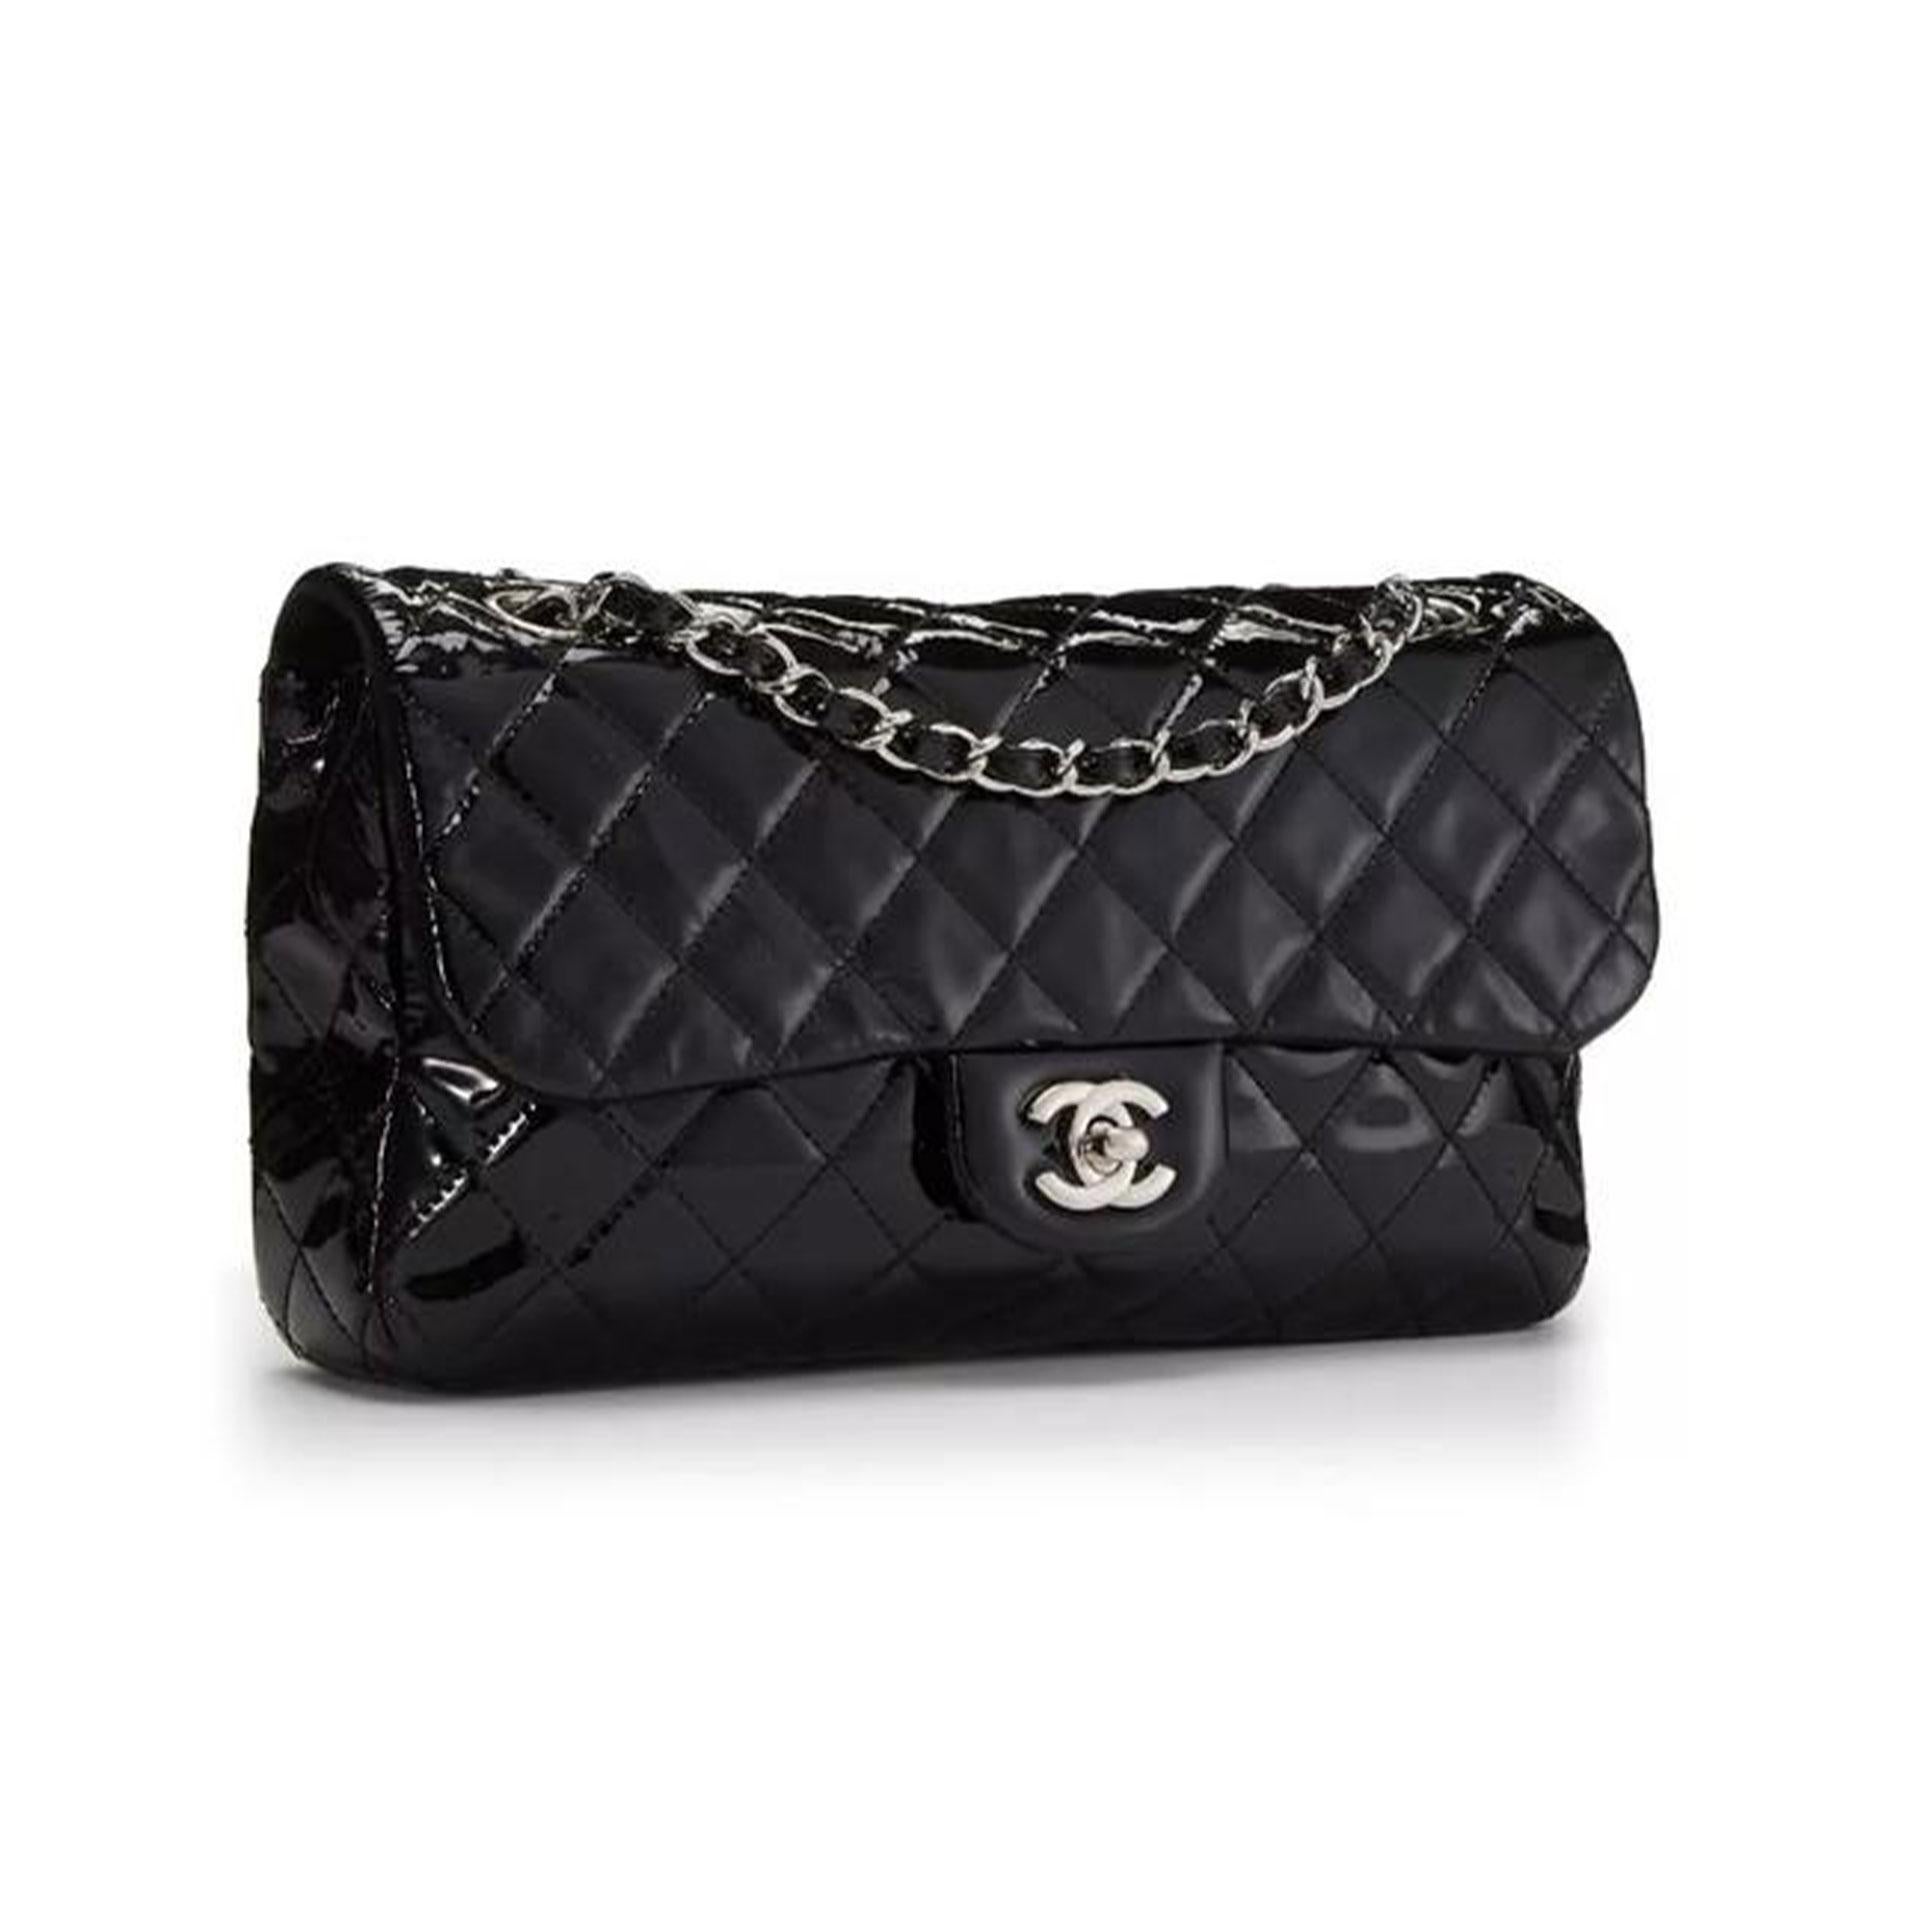  2 In 1 Chanel Shopping Classic Flap Cruise Mesh Woven Crochet Black Patent Bag For Sale 1